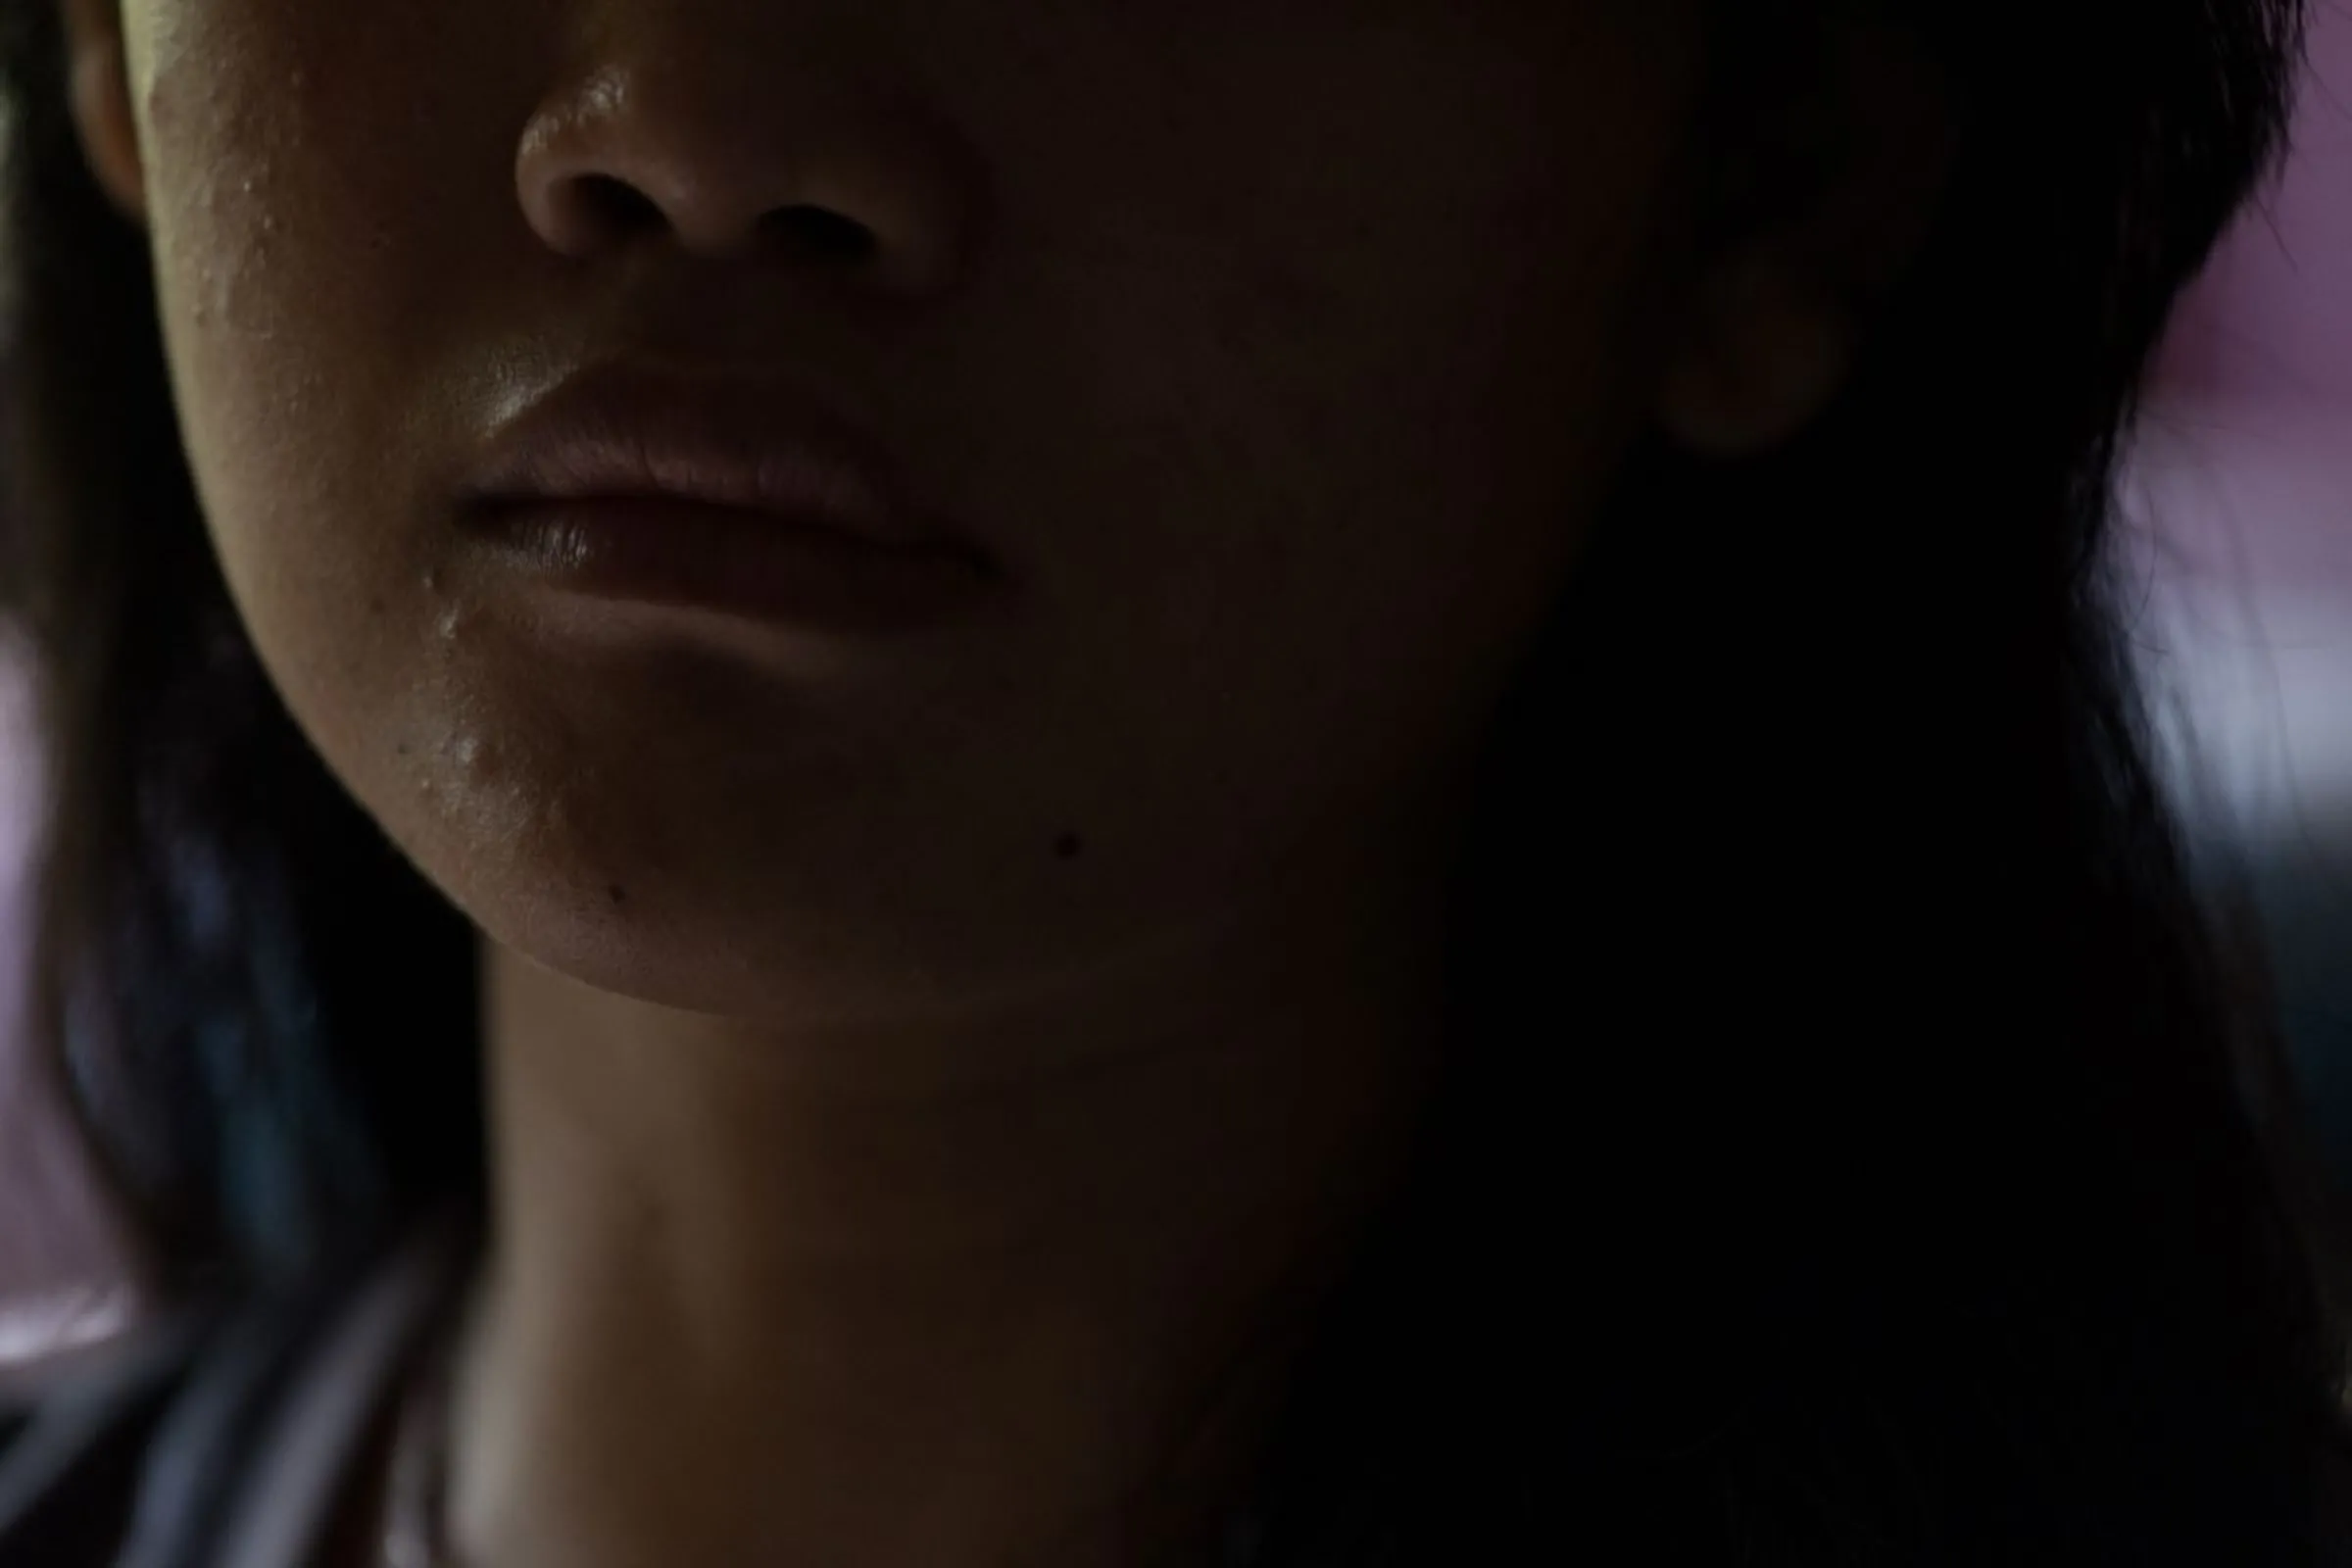 Rica, 18, was rescued by the Women’s Shelter after being sexually trafficked by her boyfriend and employer, Tacloban City, Philippines, October 9, 2023. Thomson Reuters Foundation/Kathleen Limayo